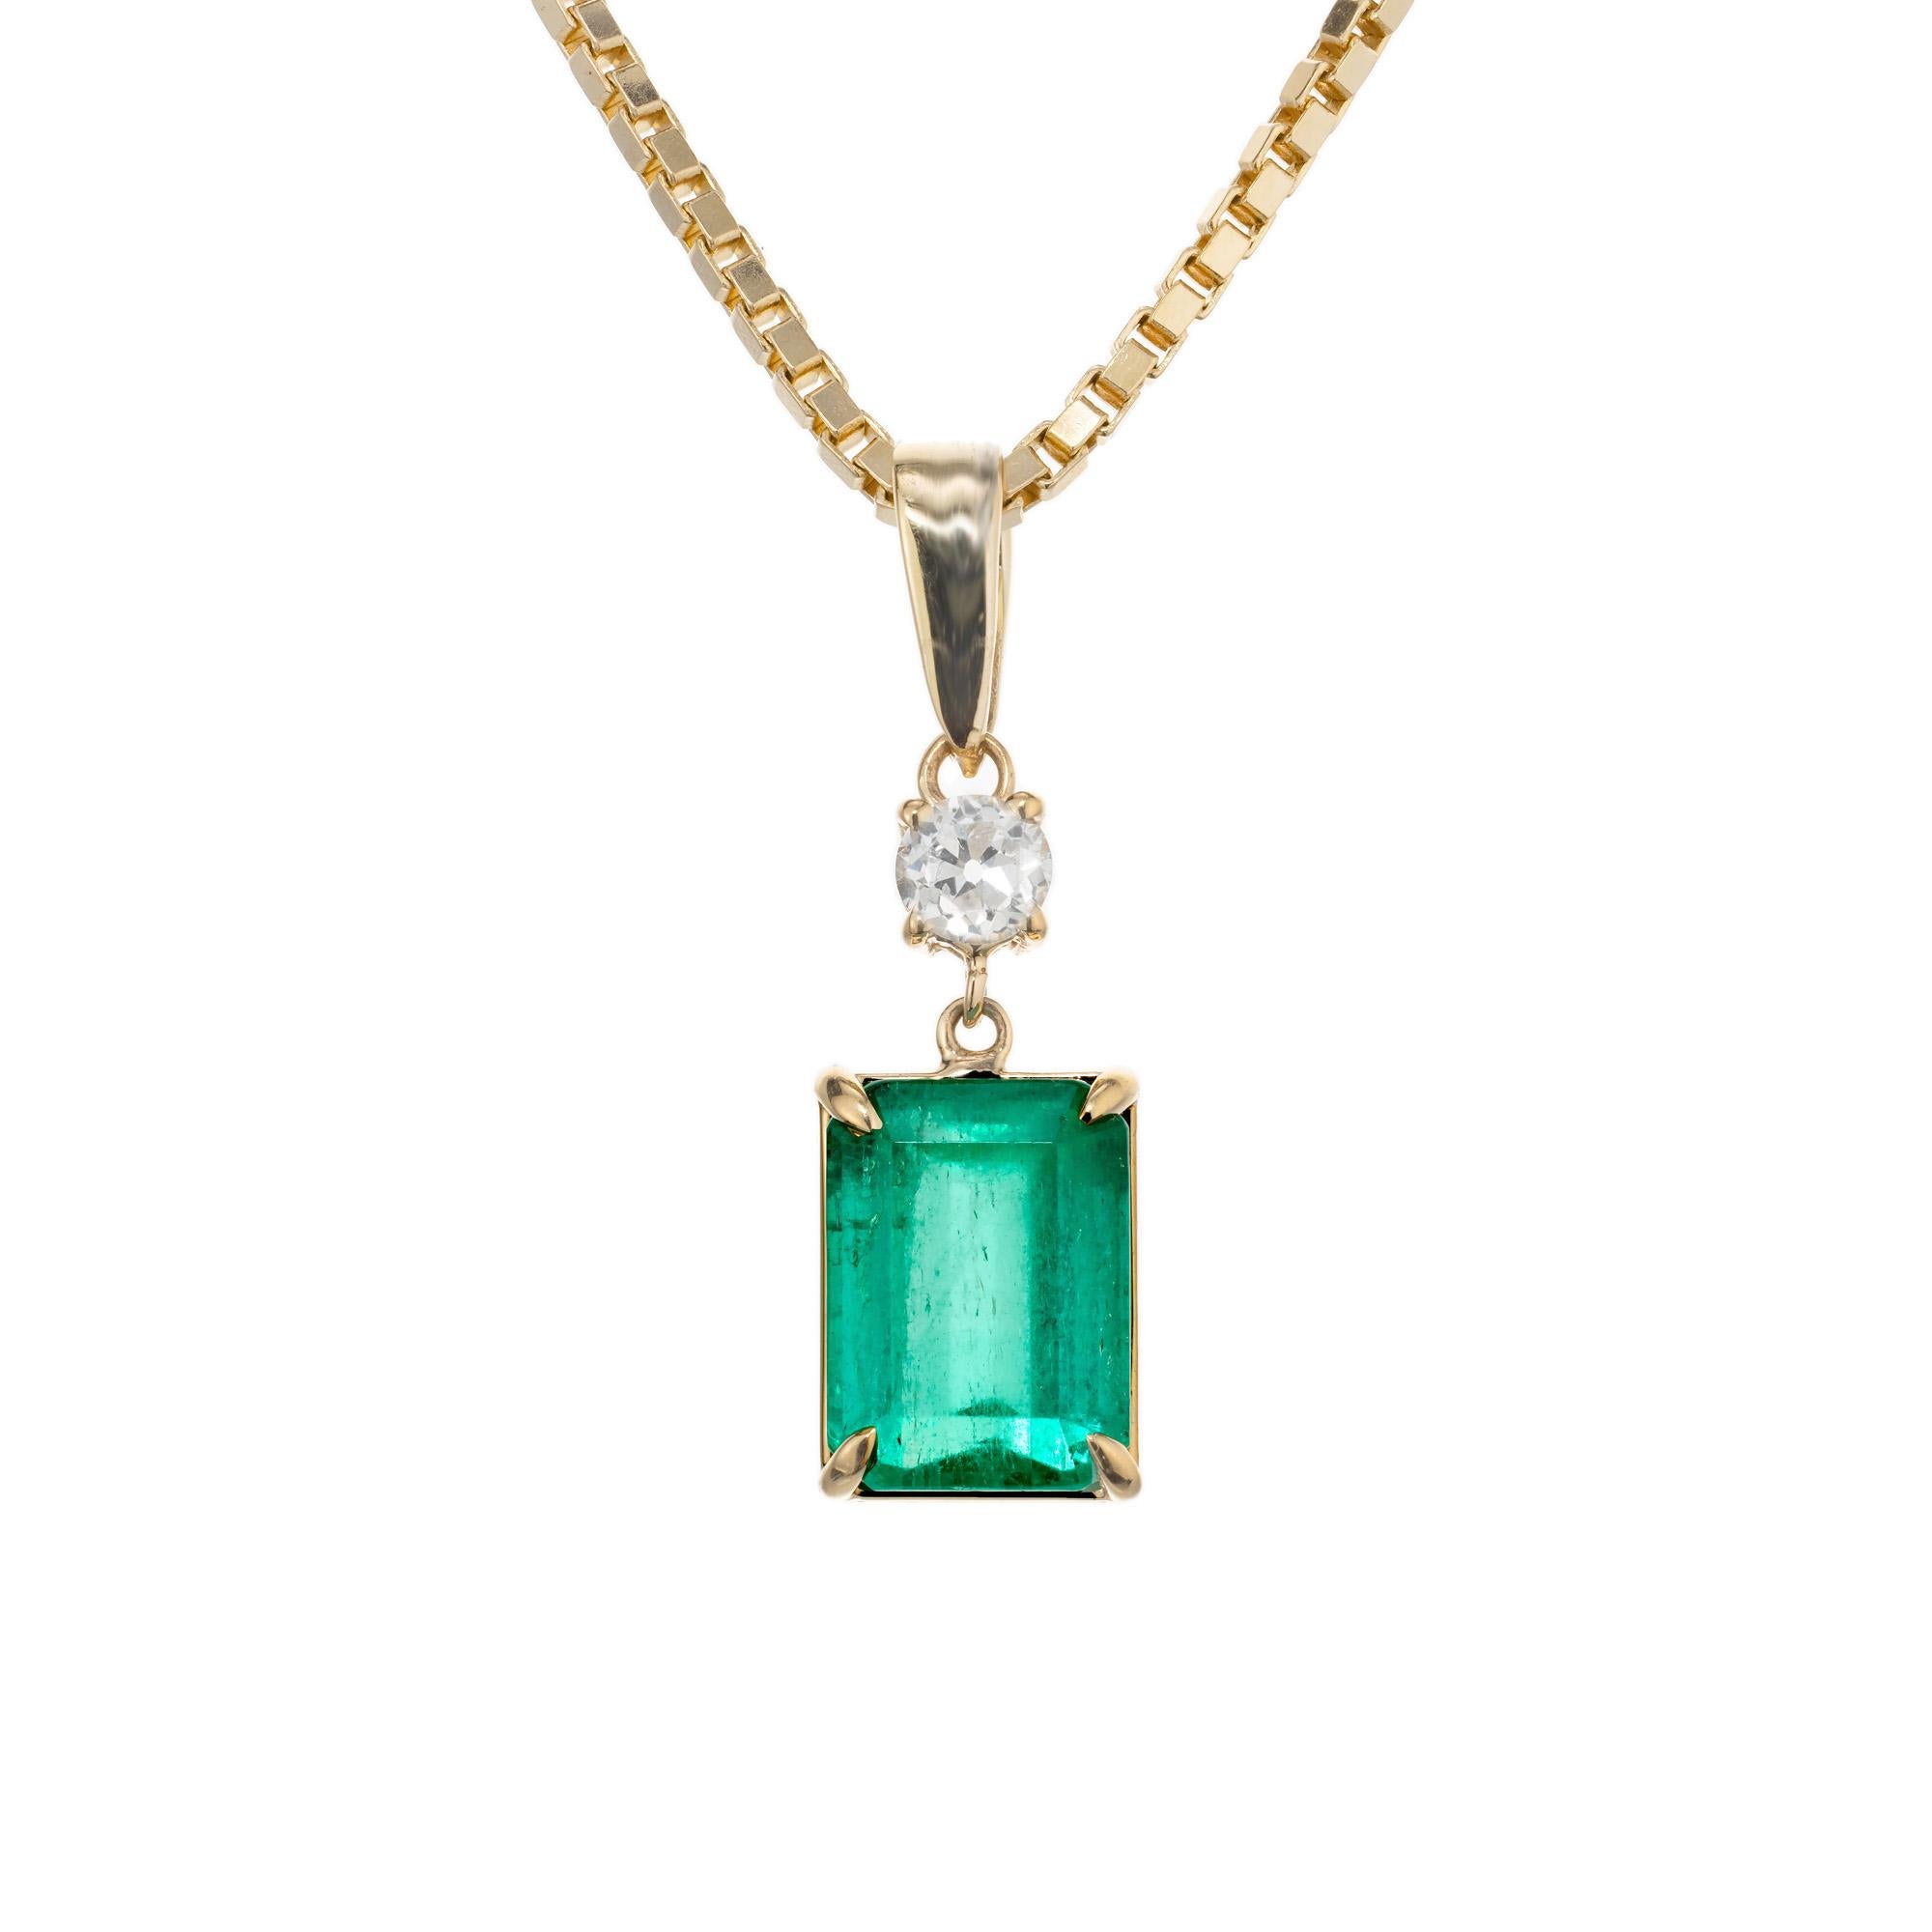 Natural emerald cut emerald and diamond pendant necklace. GIA certified 2.40ct octagonal step cut green emerald mounted into a 14k yellow gold setting with a round brilliant cut accent diamond. 16.50 14k yellow gold chain. The GIA certified this as